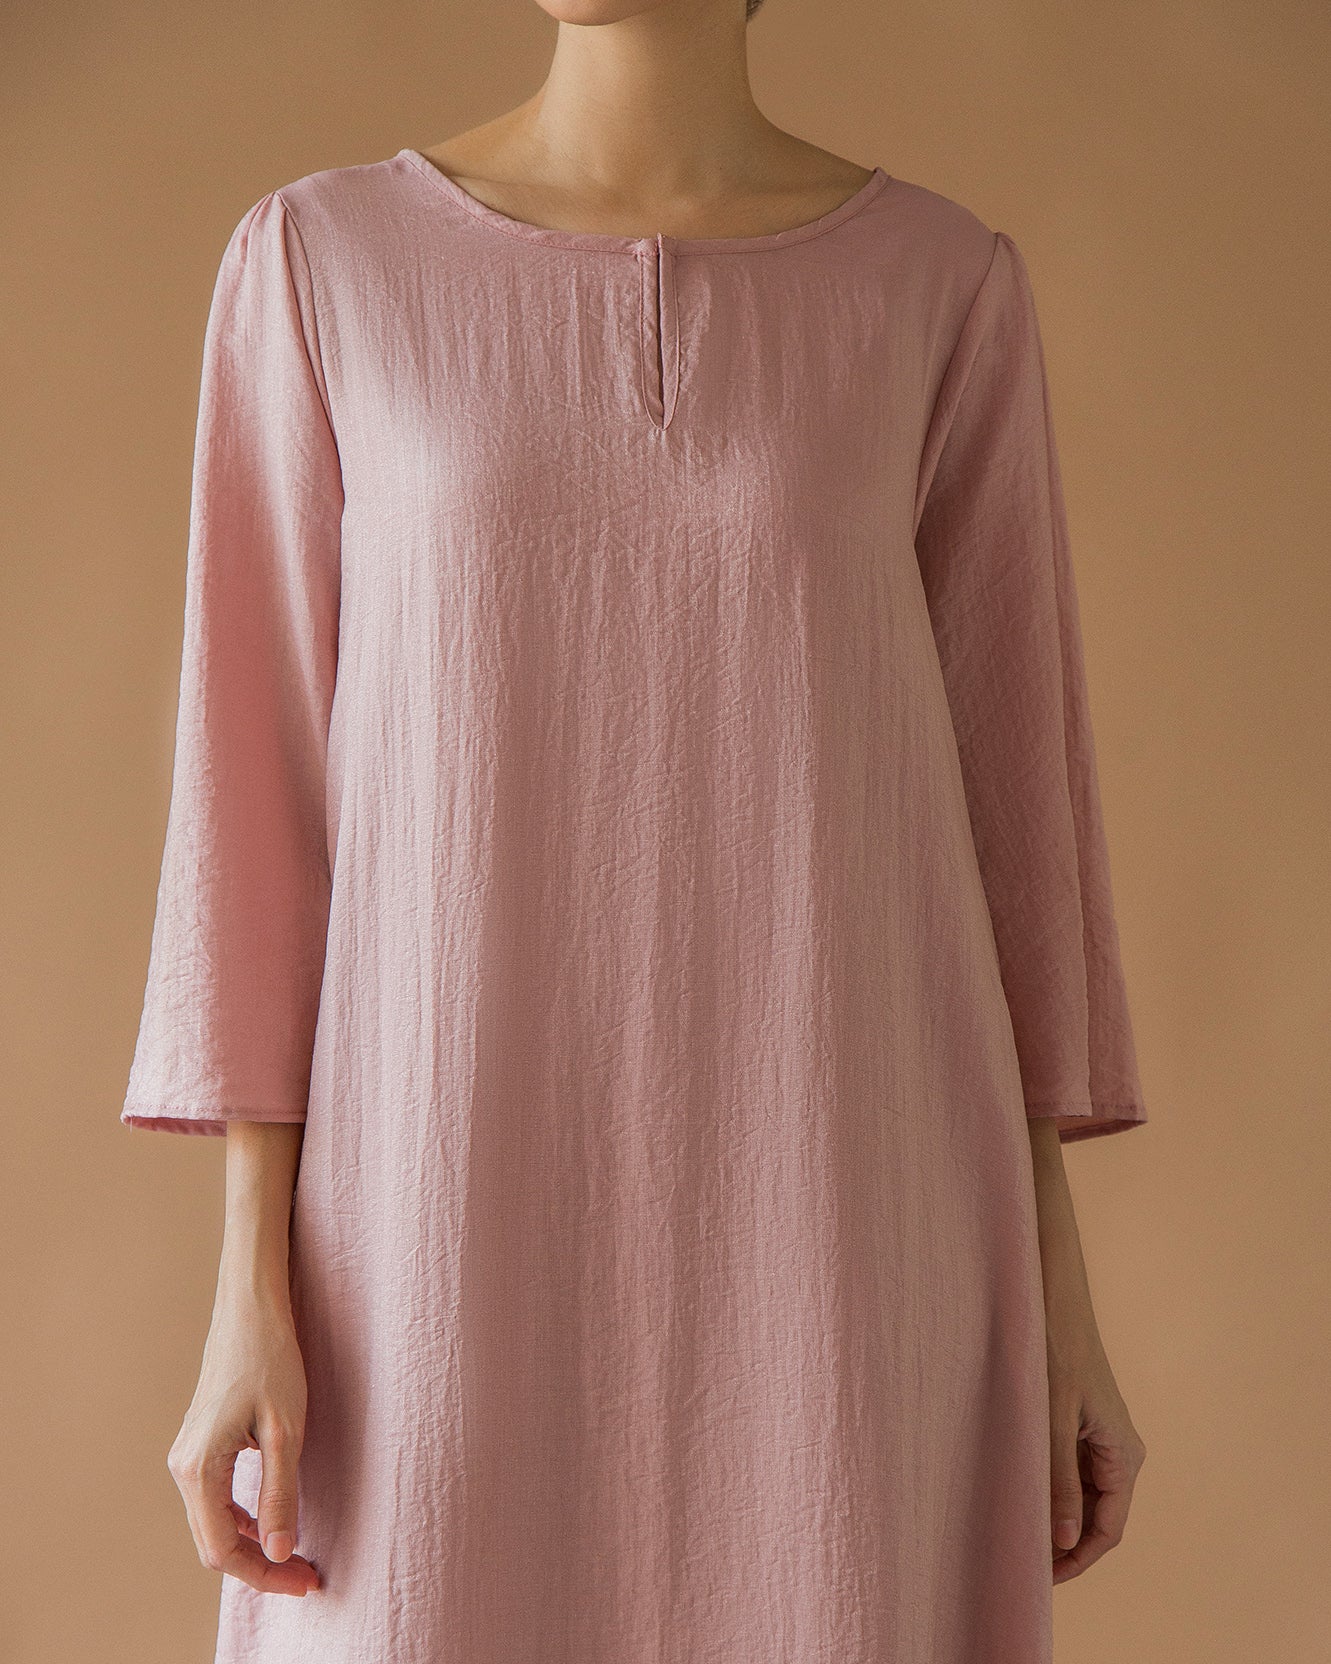 STYLE 56 - dusty pink